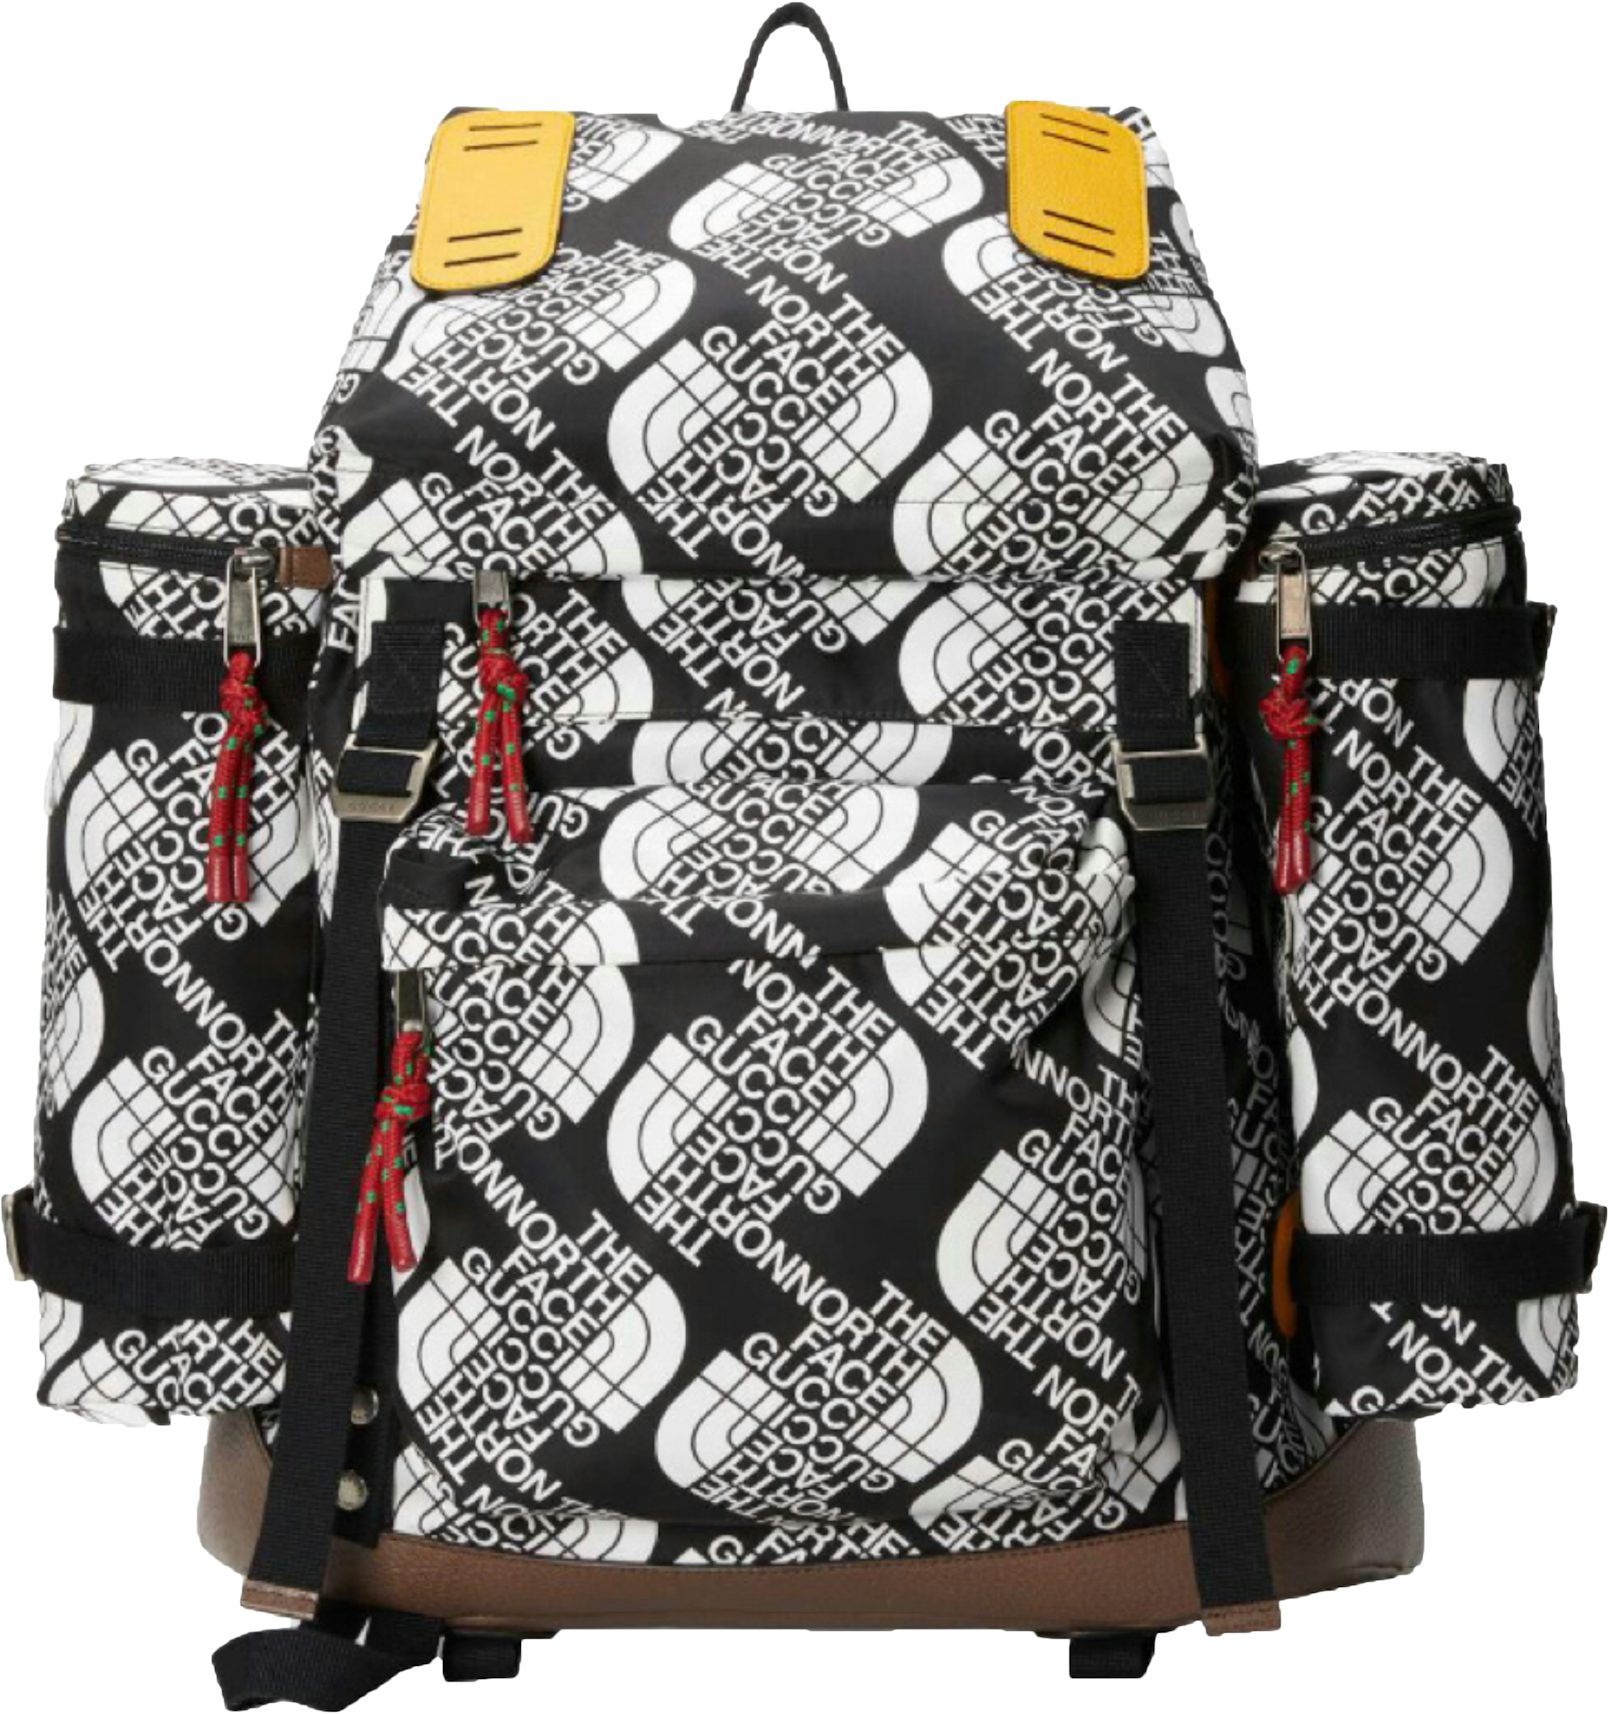 Back to School With Style: Louis Vuitton and Gucci Backpacks at StockX -  StockX News